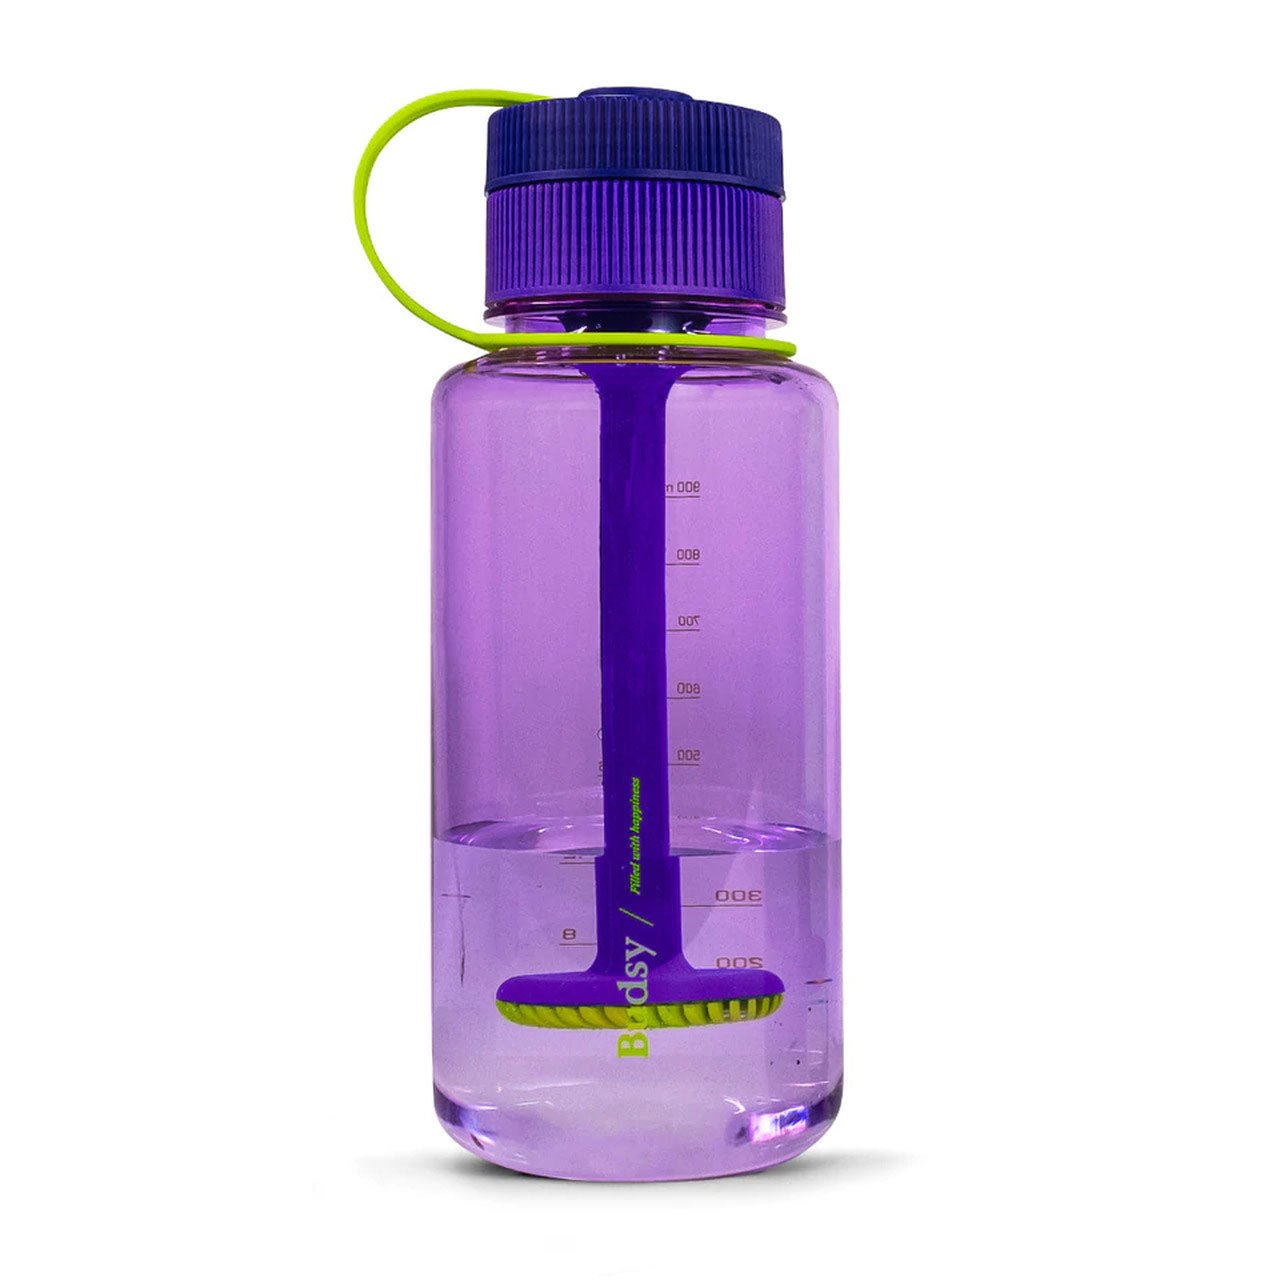 Water Bong for Smoking Weed Buds Close-up Stock Image - Image of